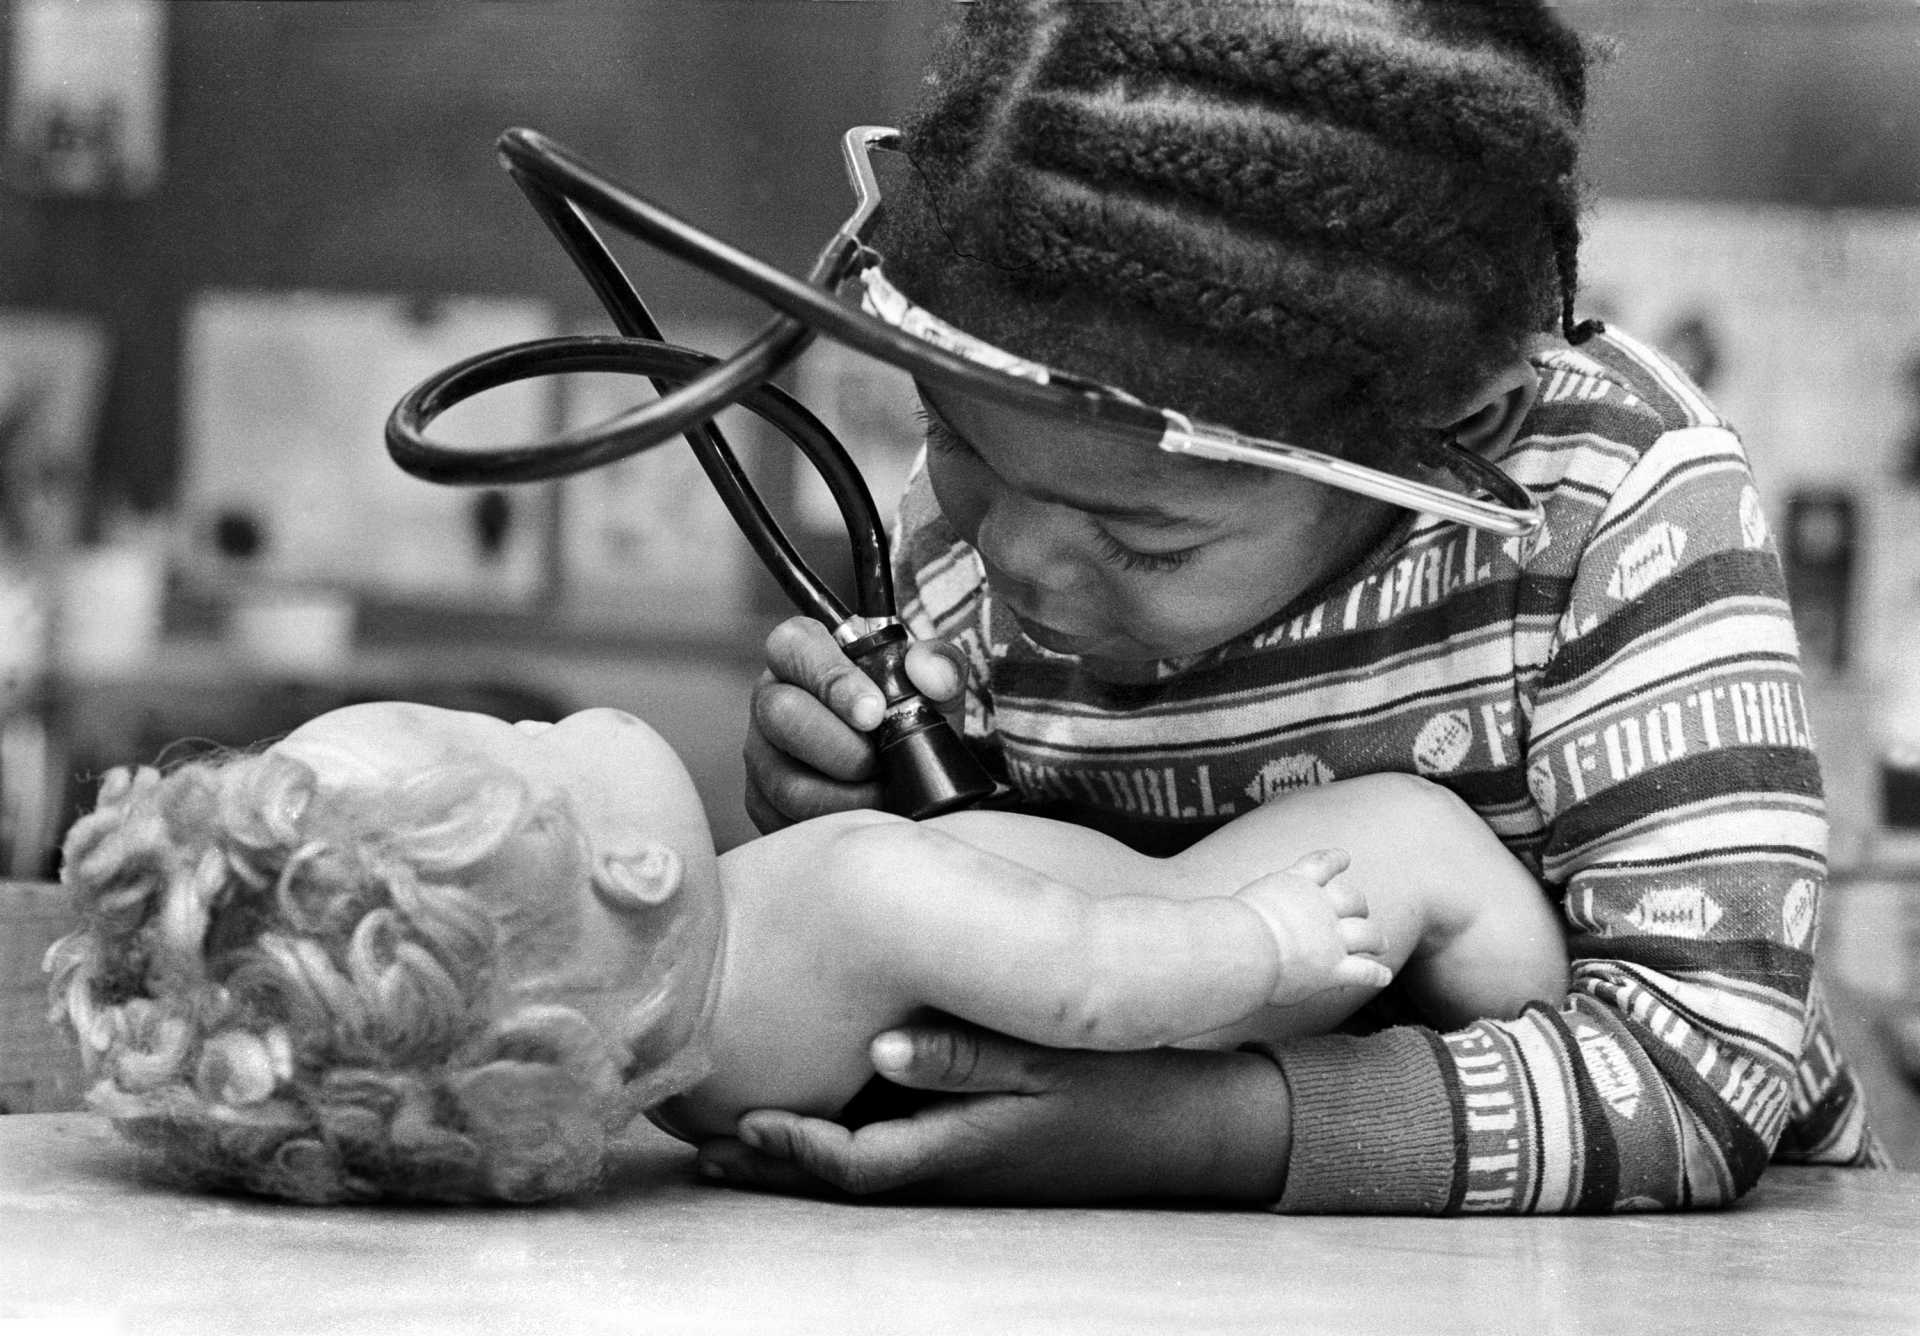 An aspiring doctor examines her doll. 1981